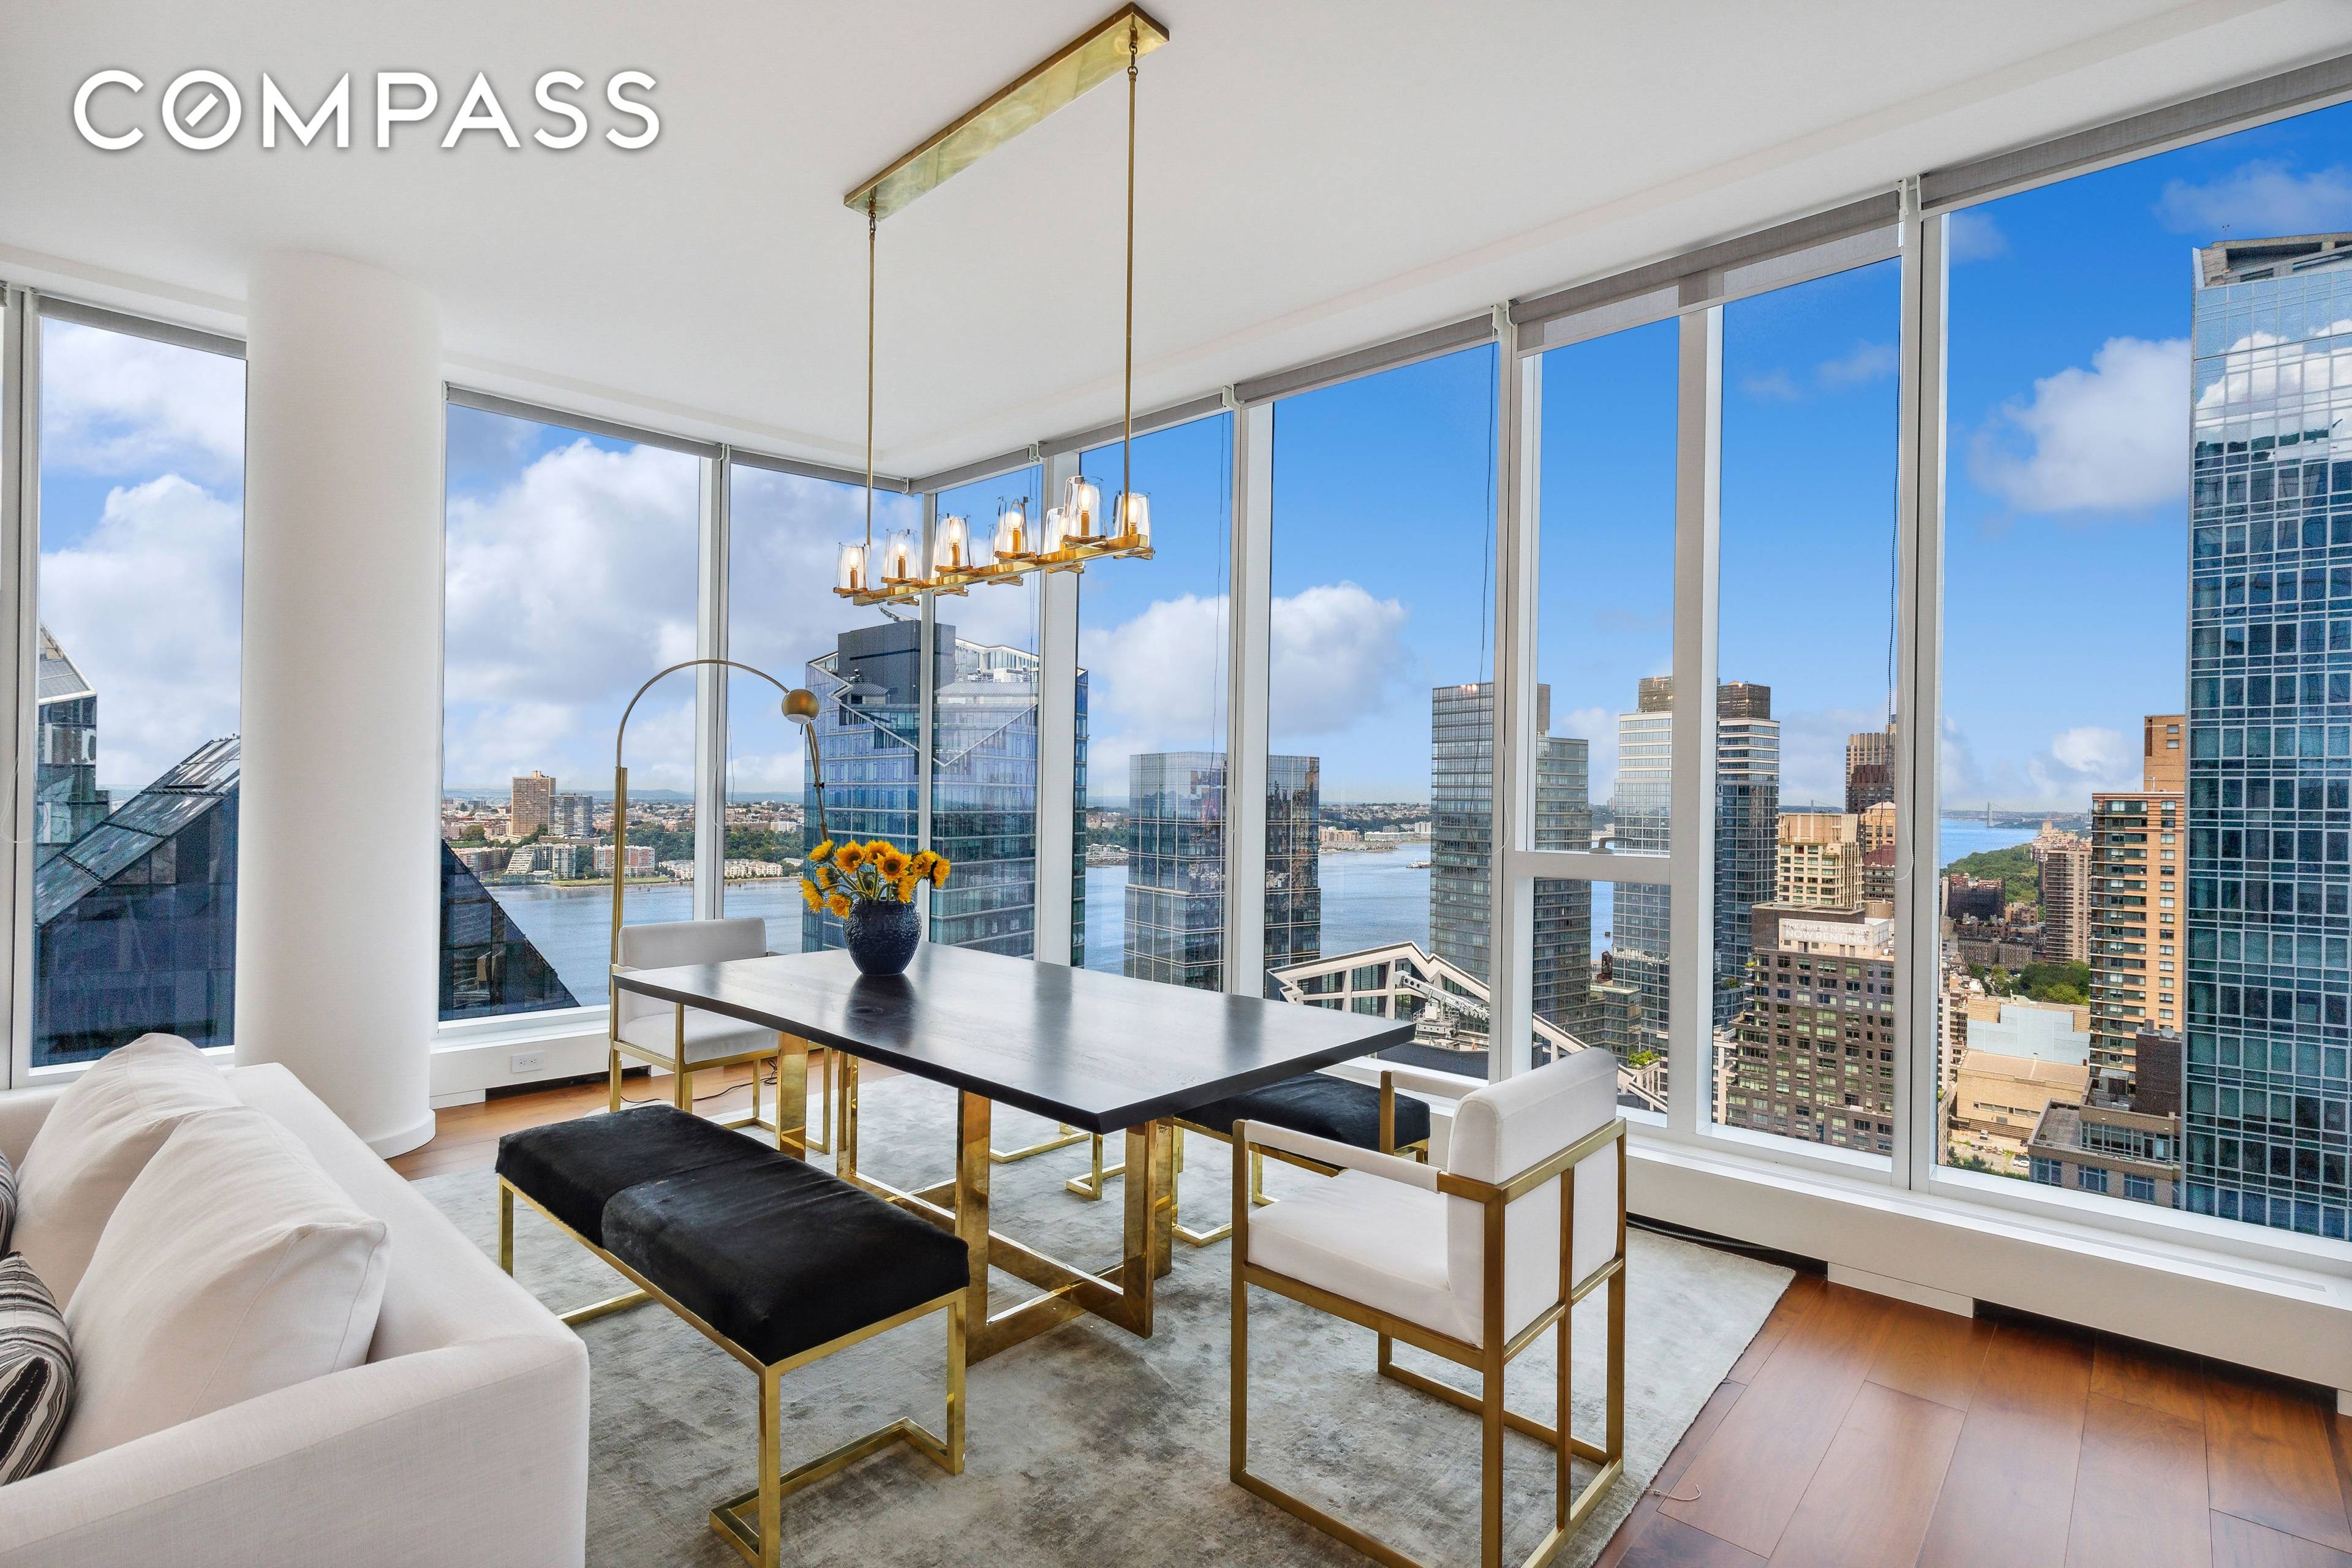 Welcome to this flawlessly designed, high floor corner three bedroom, three and a half bath residence in the heart of Manhattan, where luxury living awaits.